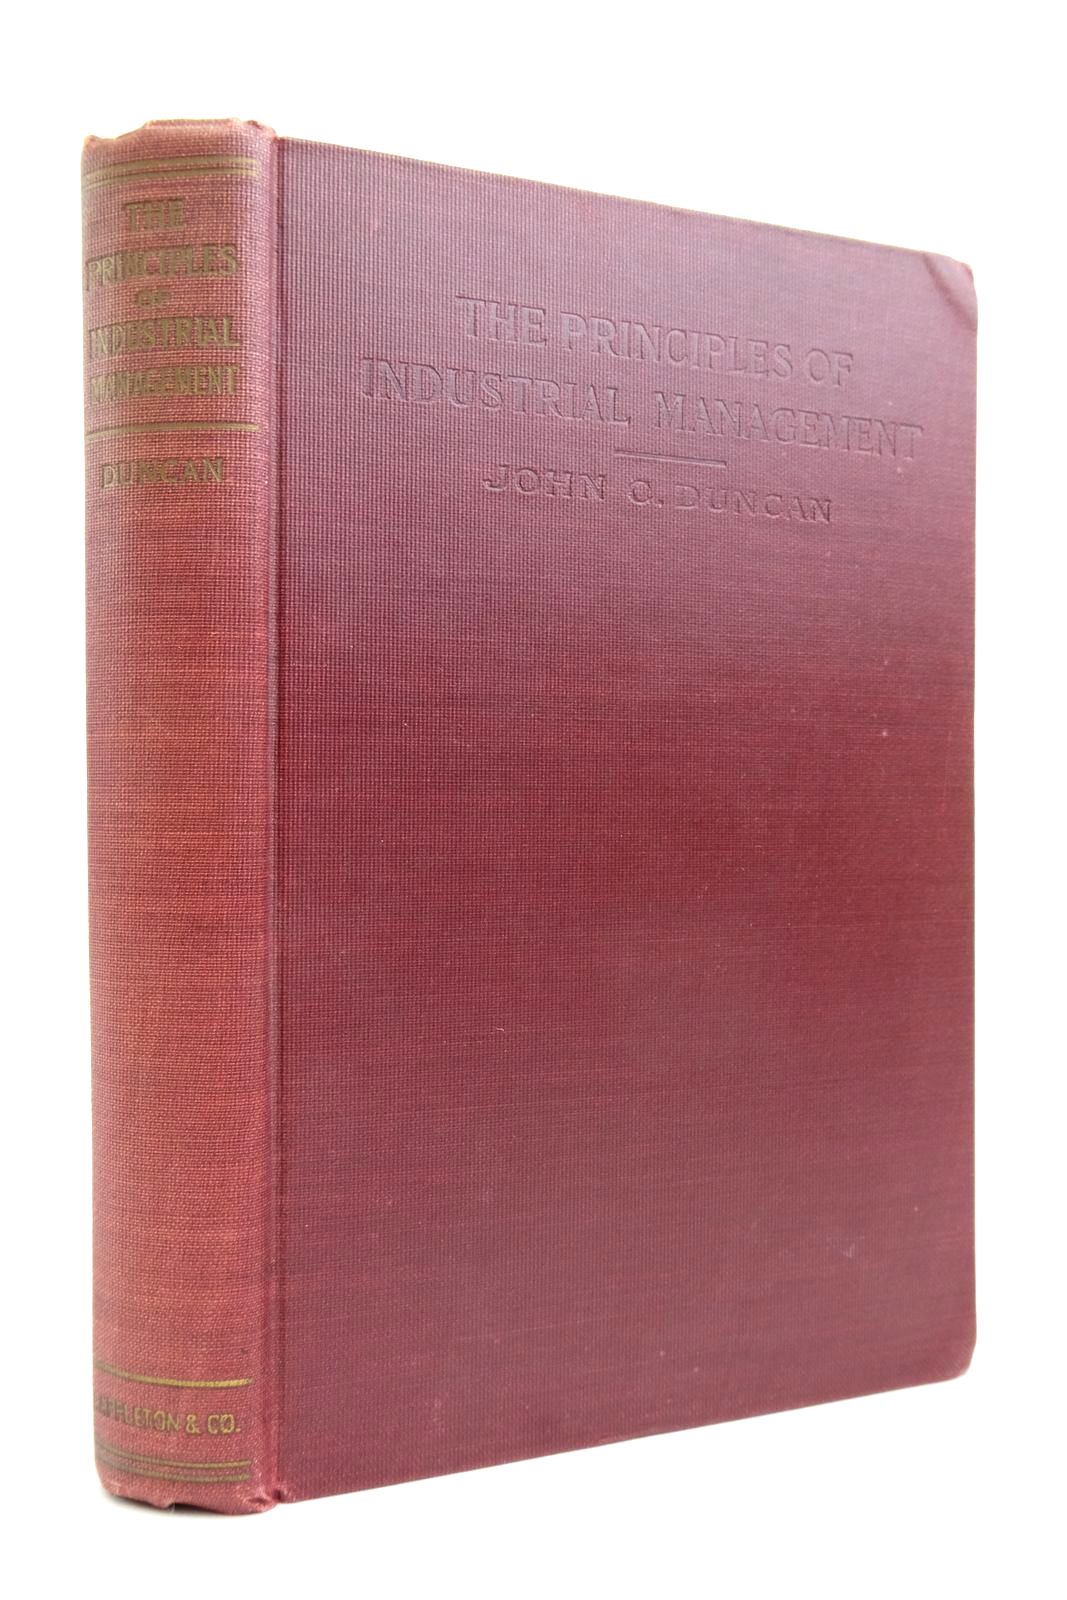 Photo of THE PRINCIPLES OF INDUSTRIAL MANAGEMENT written by Duncan, John C. published by D. Appleton And Company (STOCK CODE: 2135963)  for sale by Stella & Rose's Books